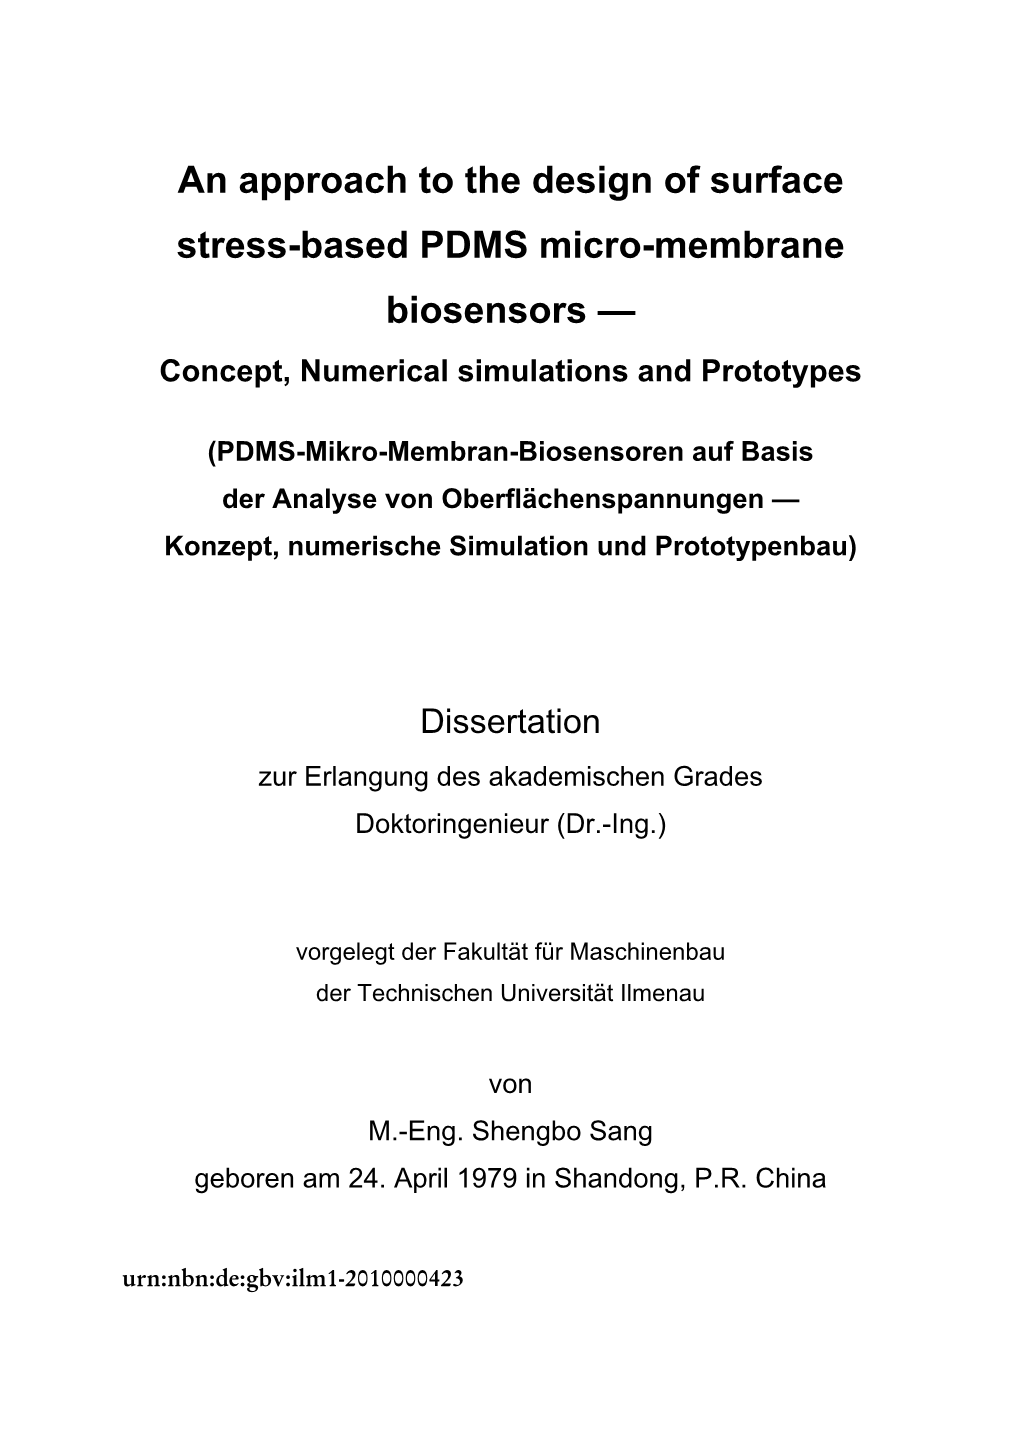 An Approach to the Design of Surface Stress-Based PDMS Micro-Membrane Biosensors — Concept, Numerical Simulations and Prototypes